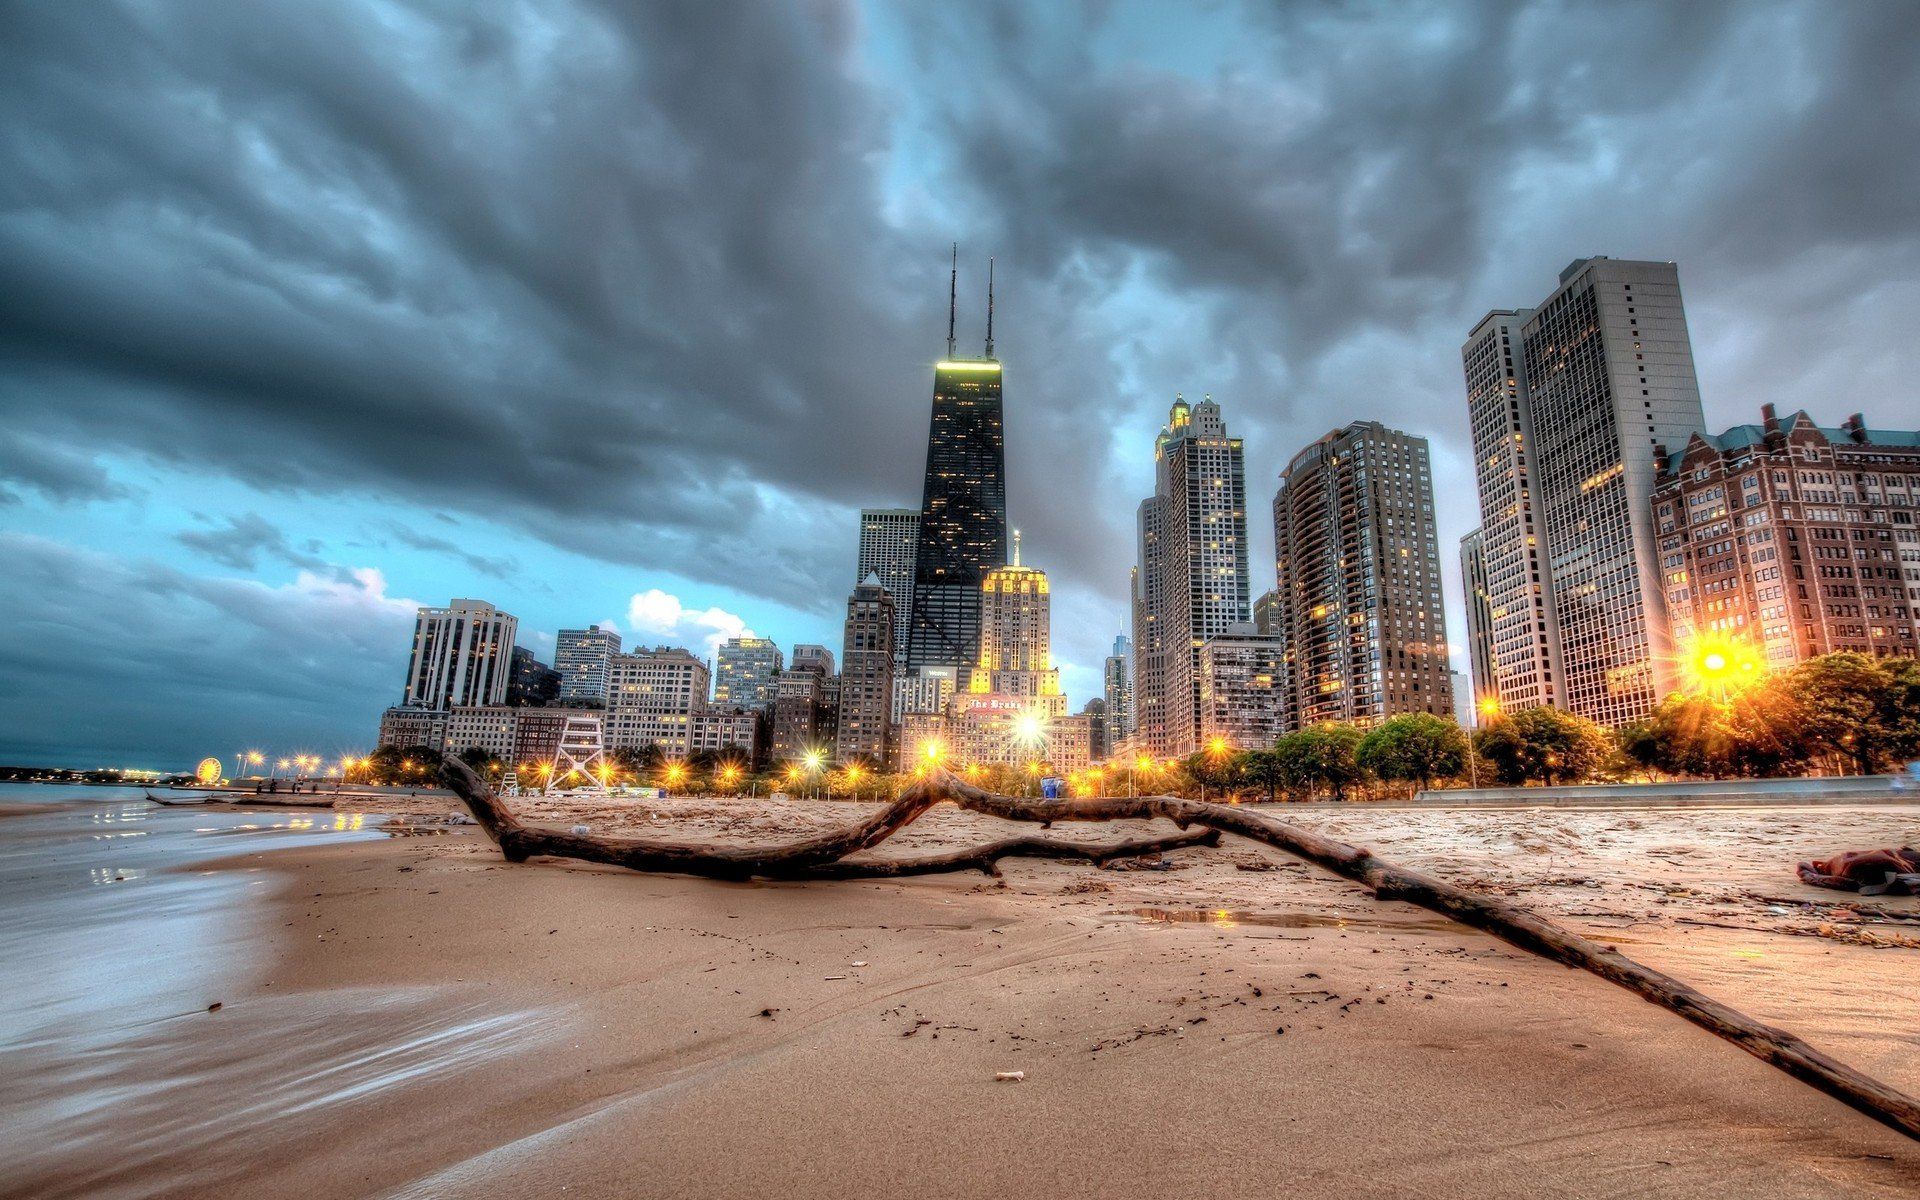 The Chicago skyline is seen from Oak Street Beach. - Chicago